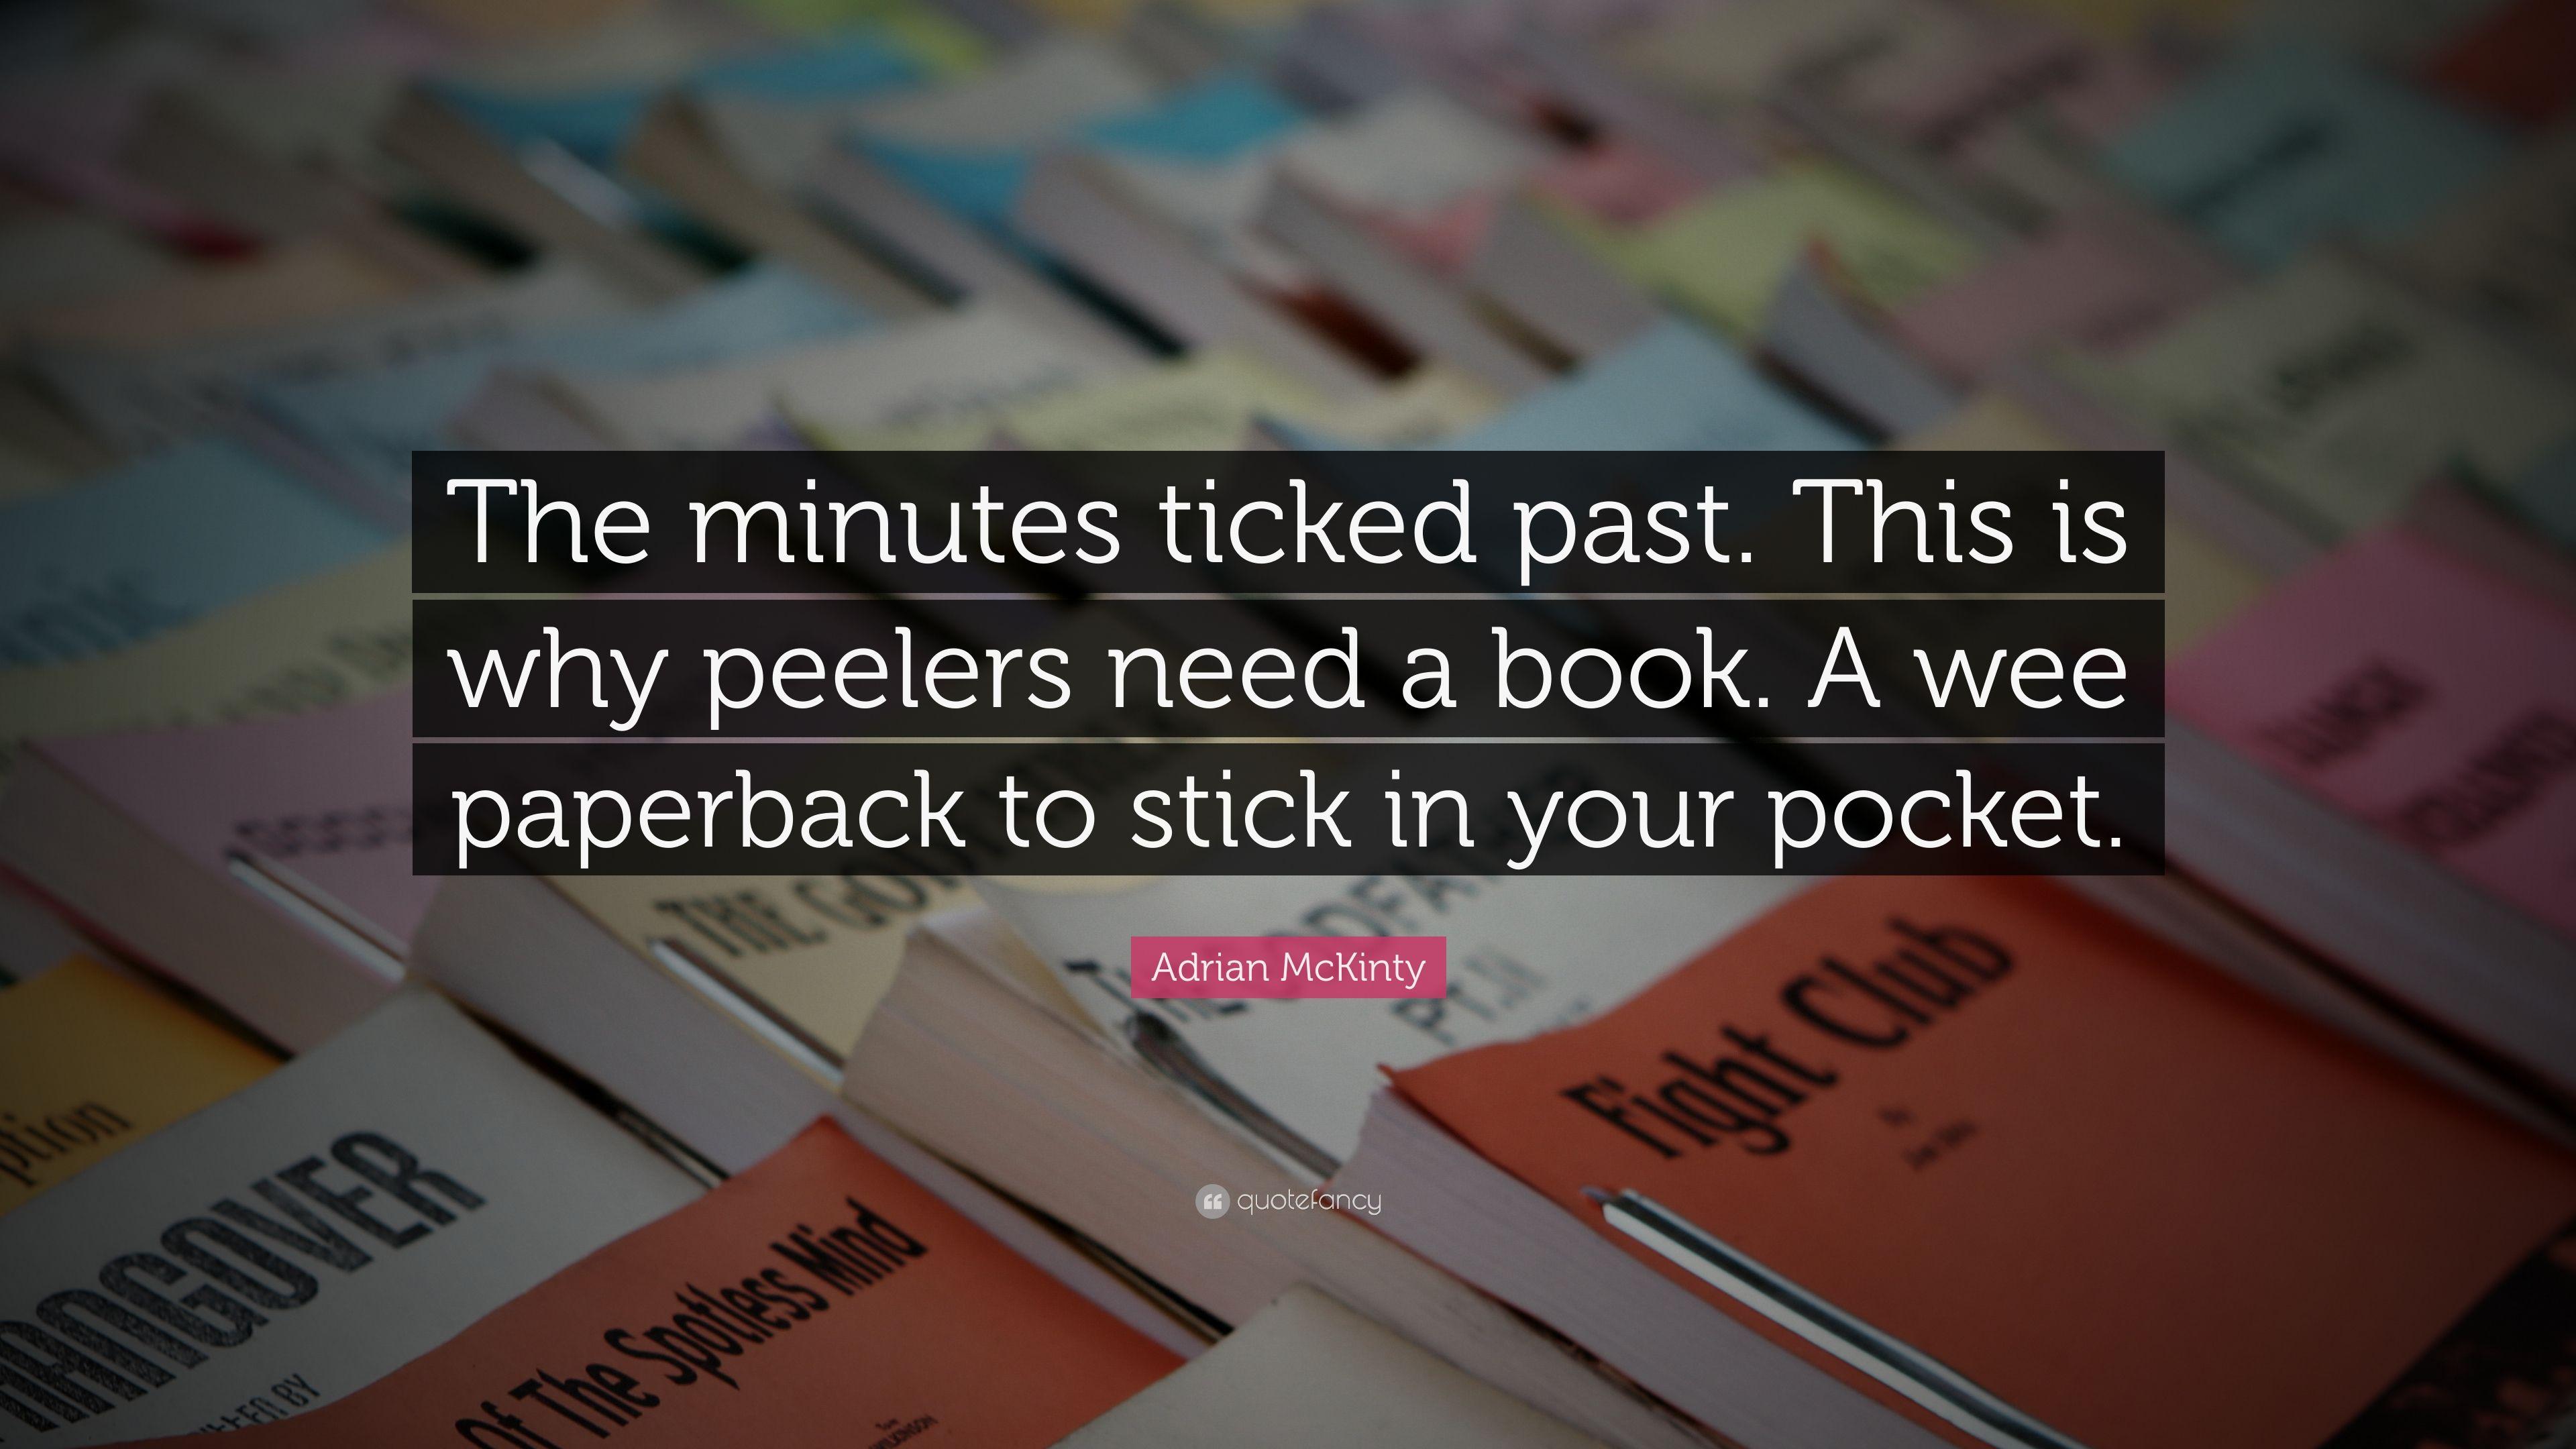 Adrian McKinty Quote: “The minutes ticked past. This is why peelers